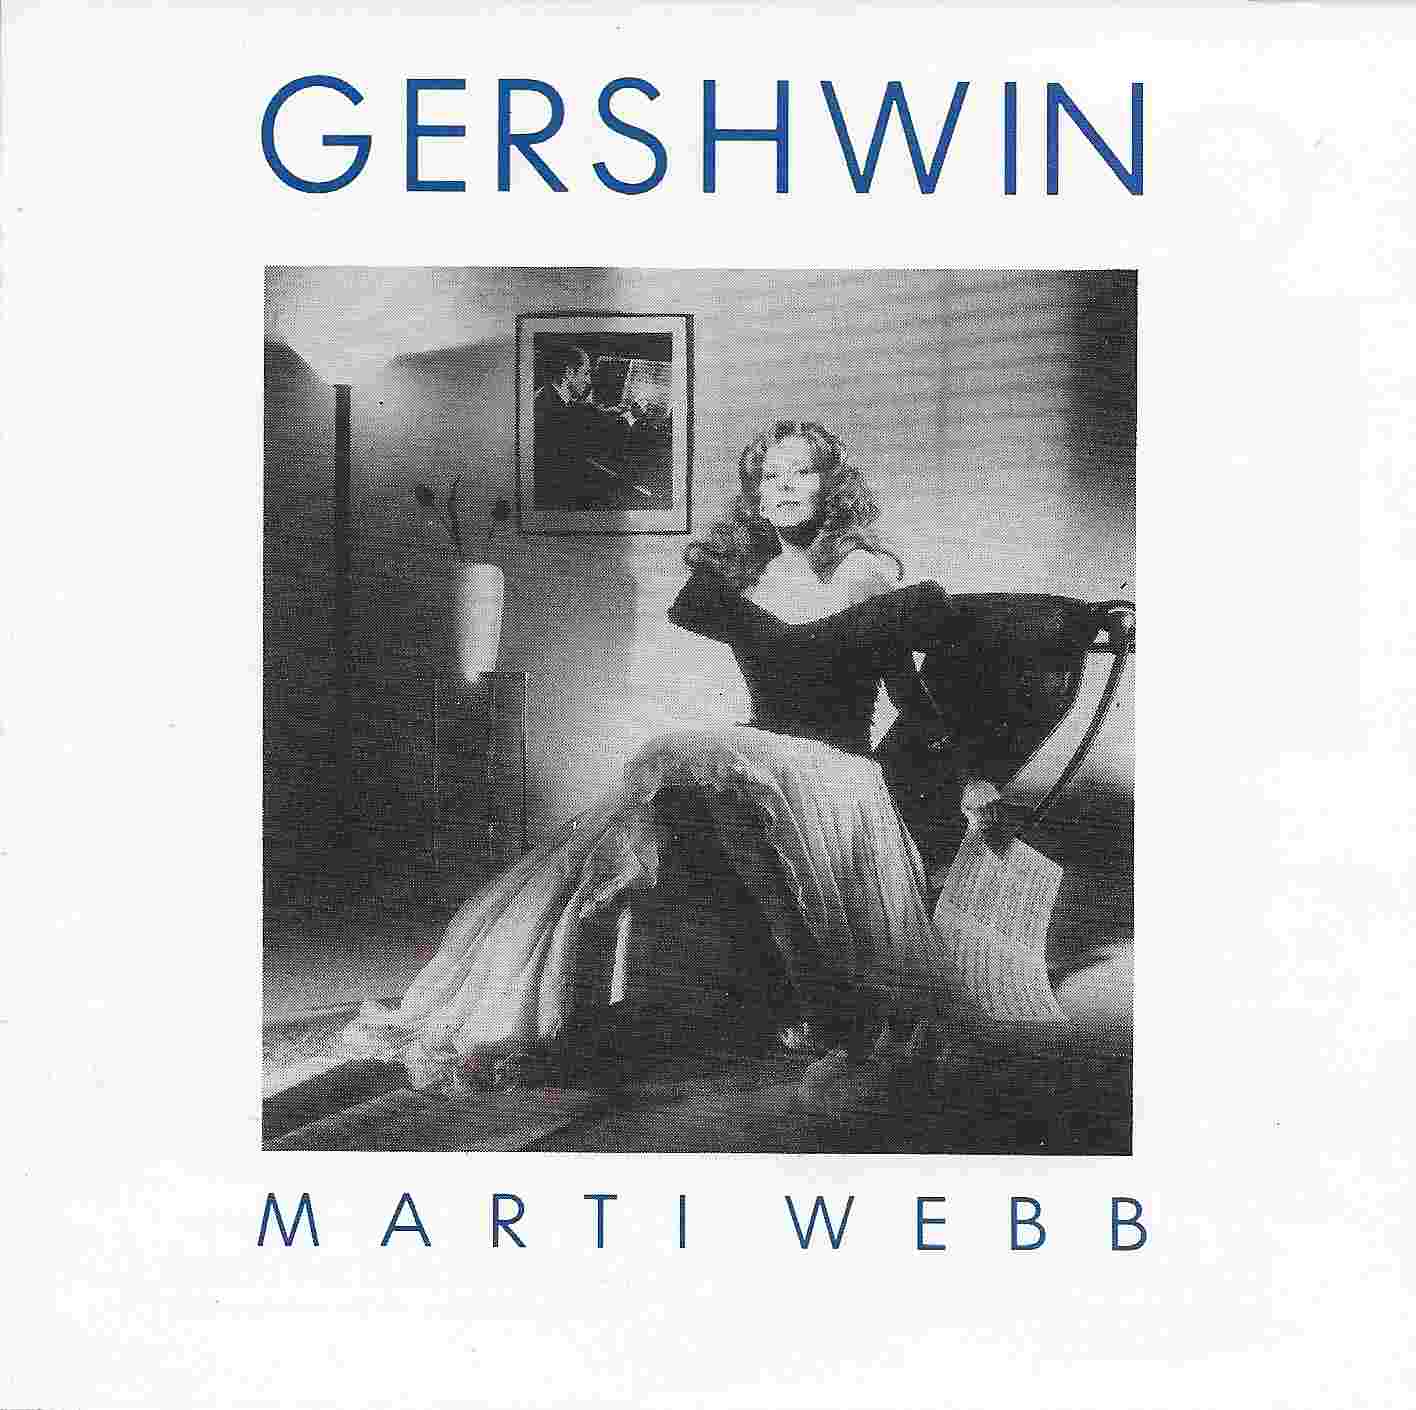 Picture of Marti Webb sings Gershwin by artist Gershwin / Marti Webb  from the BBC cds - Records and Tapes library